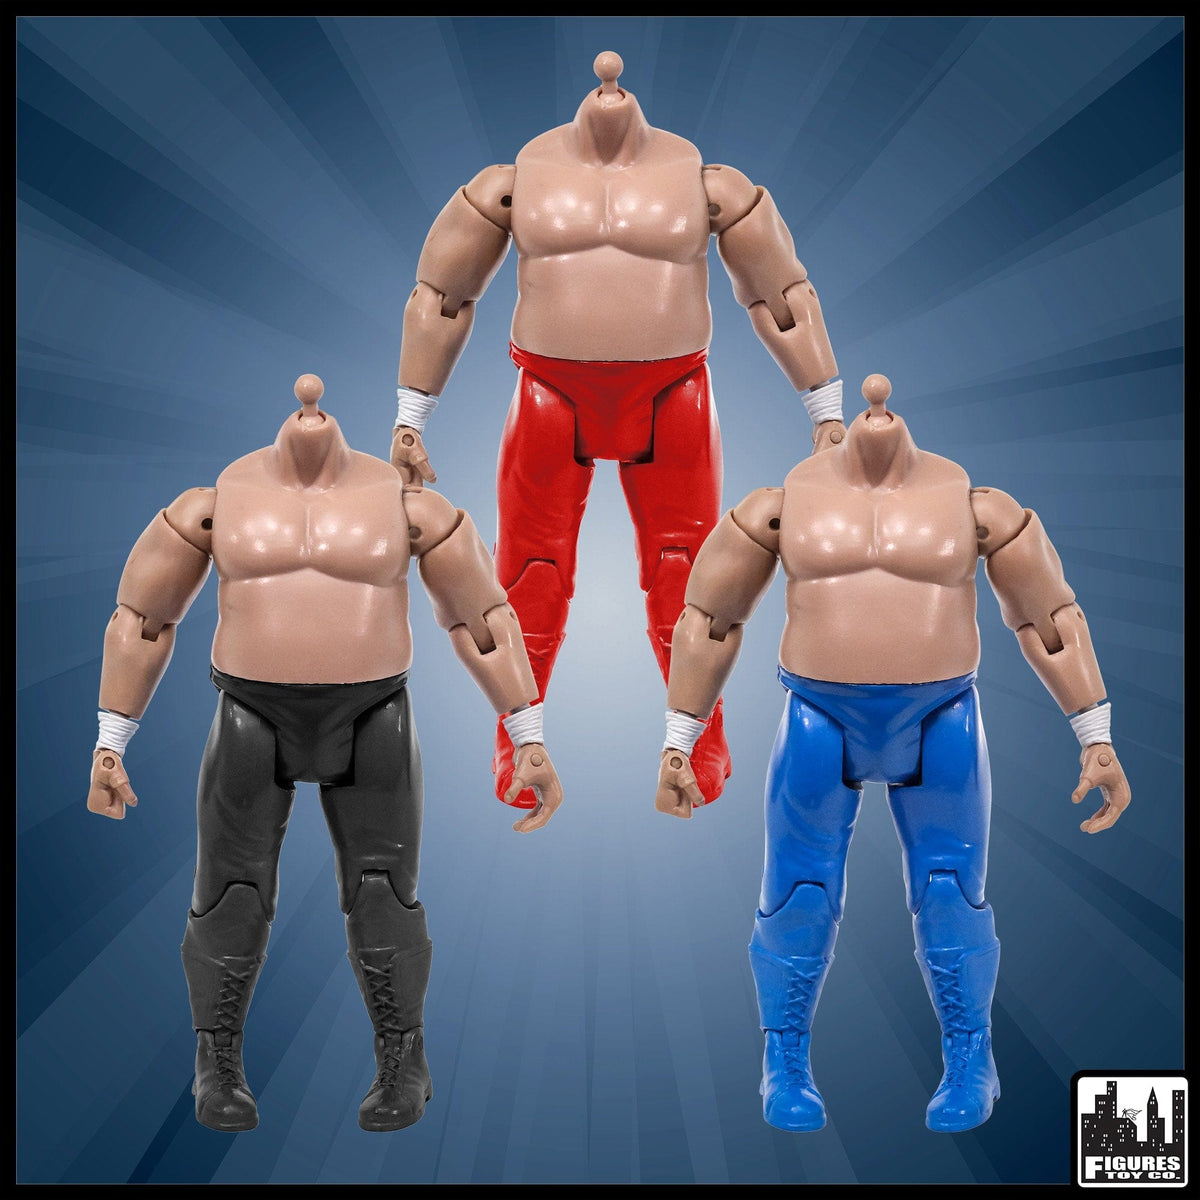 Generic 7 Inch Wrestling Action Figure With Fat White Body